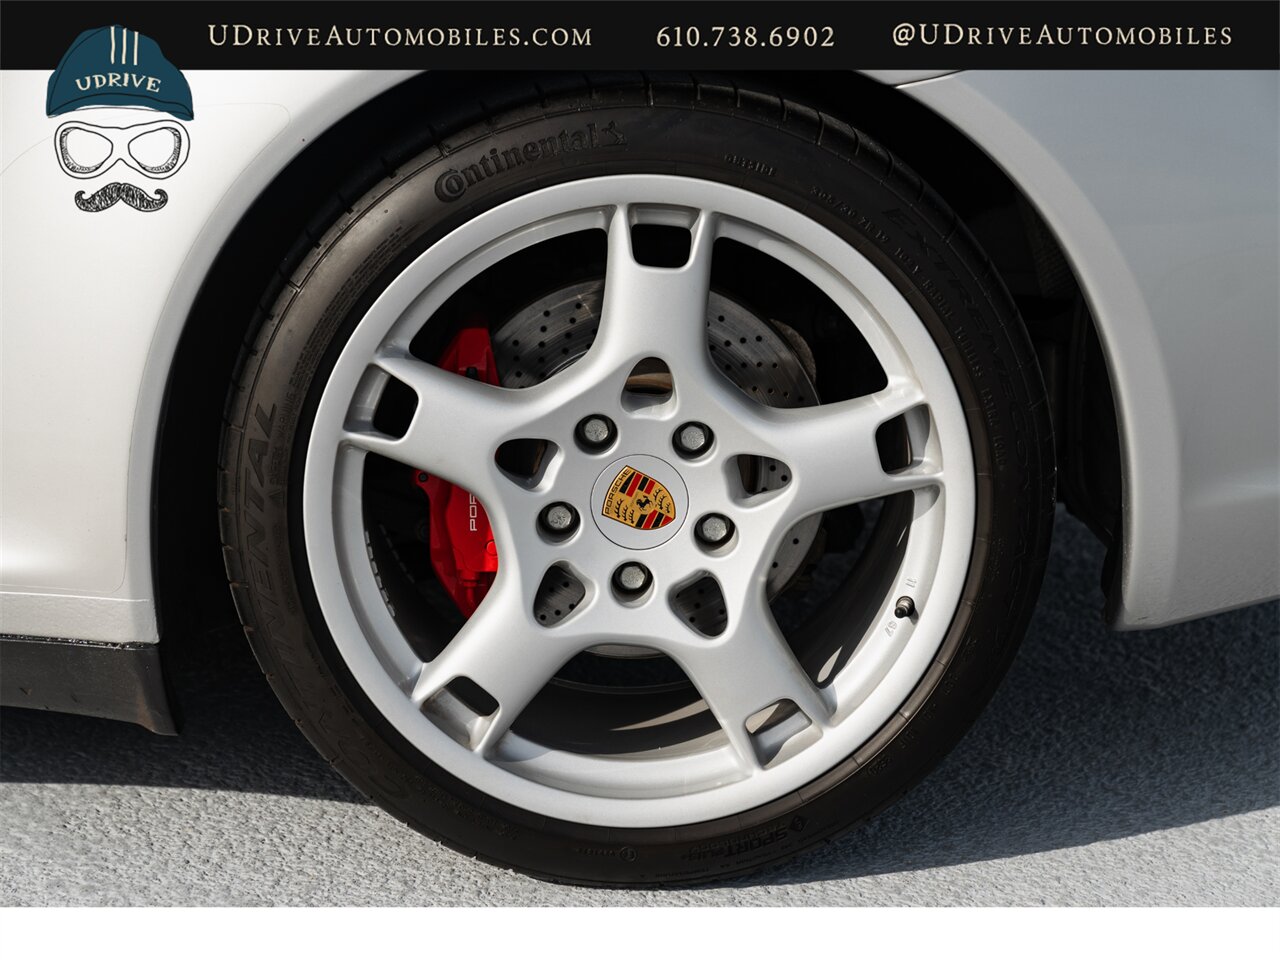 2006 Porsche 911 Carrera 4S  997 C4S 6 Speed Manual Service History - Photo 57 - West Chester, PA 19382